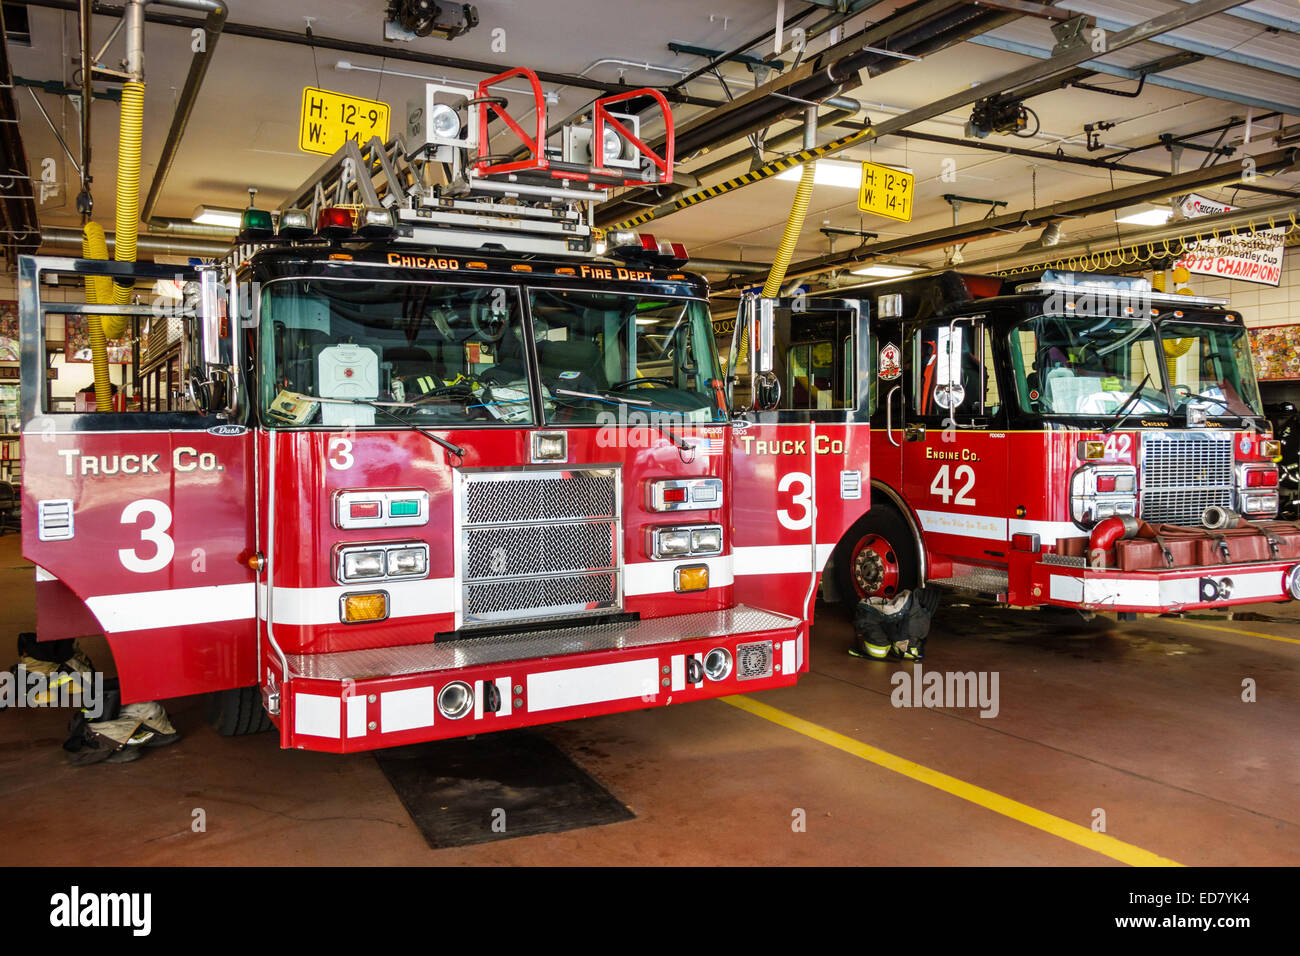 Chicago Illinois,River North,Downtown,District 1 sede centrale Chicago Fire Department,Fire Engine Truck,IL140906155 Foto Stock